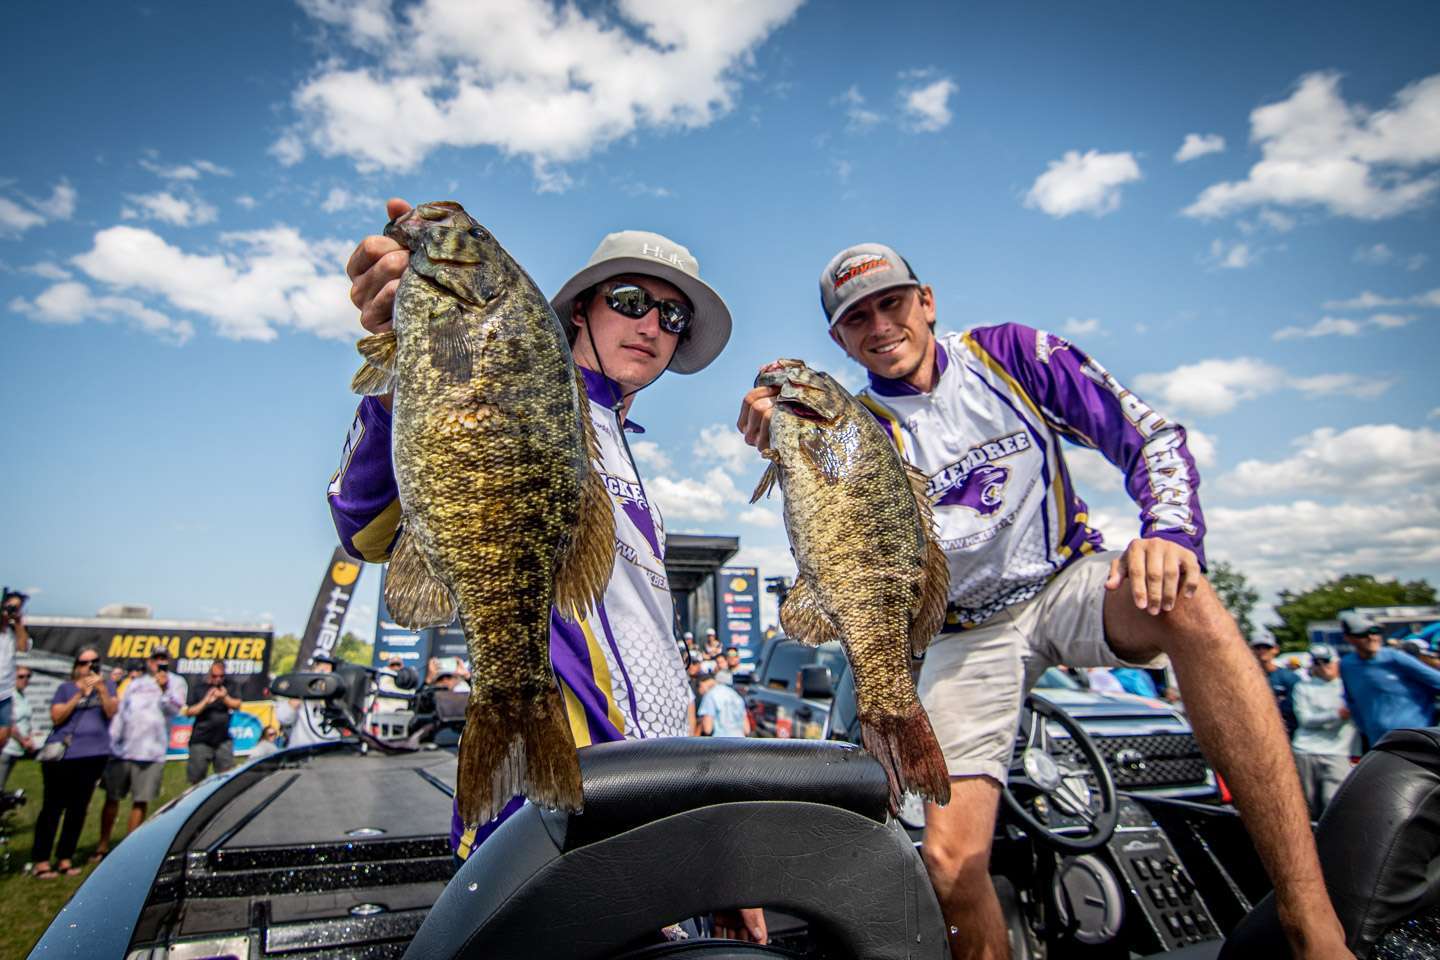 <b>Tyler Christy - Trey Schroeder, McKendree University</b><br>  After a tough regular season in 2021, Christy and Schroeder had an impressive showing at the 2021 Bassmaster College Series National Championship with a seventh-place finish. This is one of the most experienced teams in the country. Back in 2019, Christy and Schroeder finished fourth at the National Championship and competed in the College Classic Bracket. Also worth noting – Schroeder is a former Bassmaster High School All-American. 